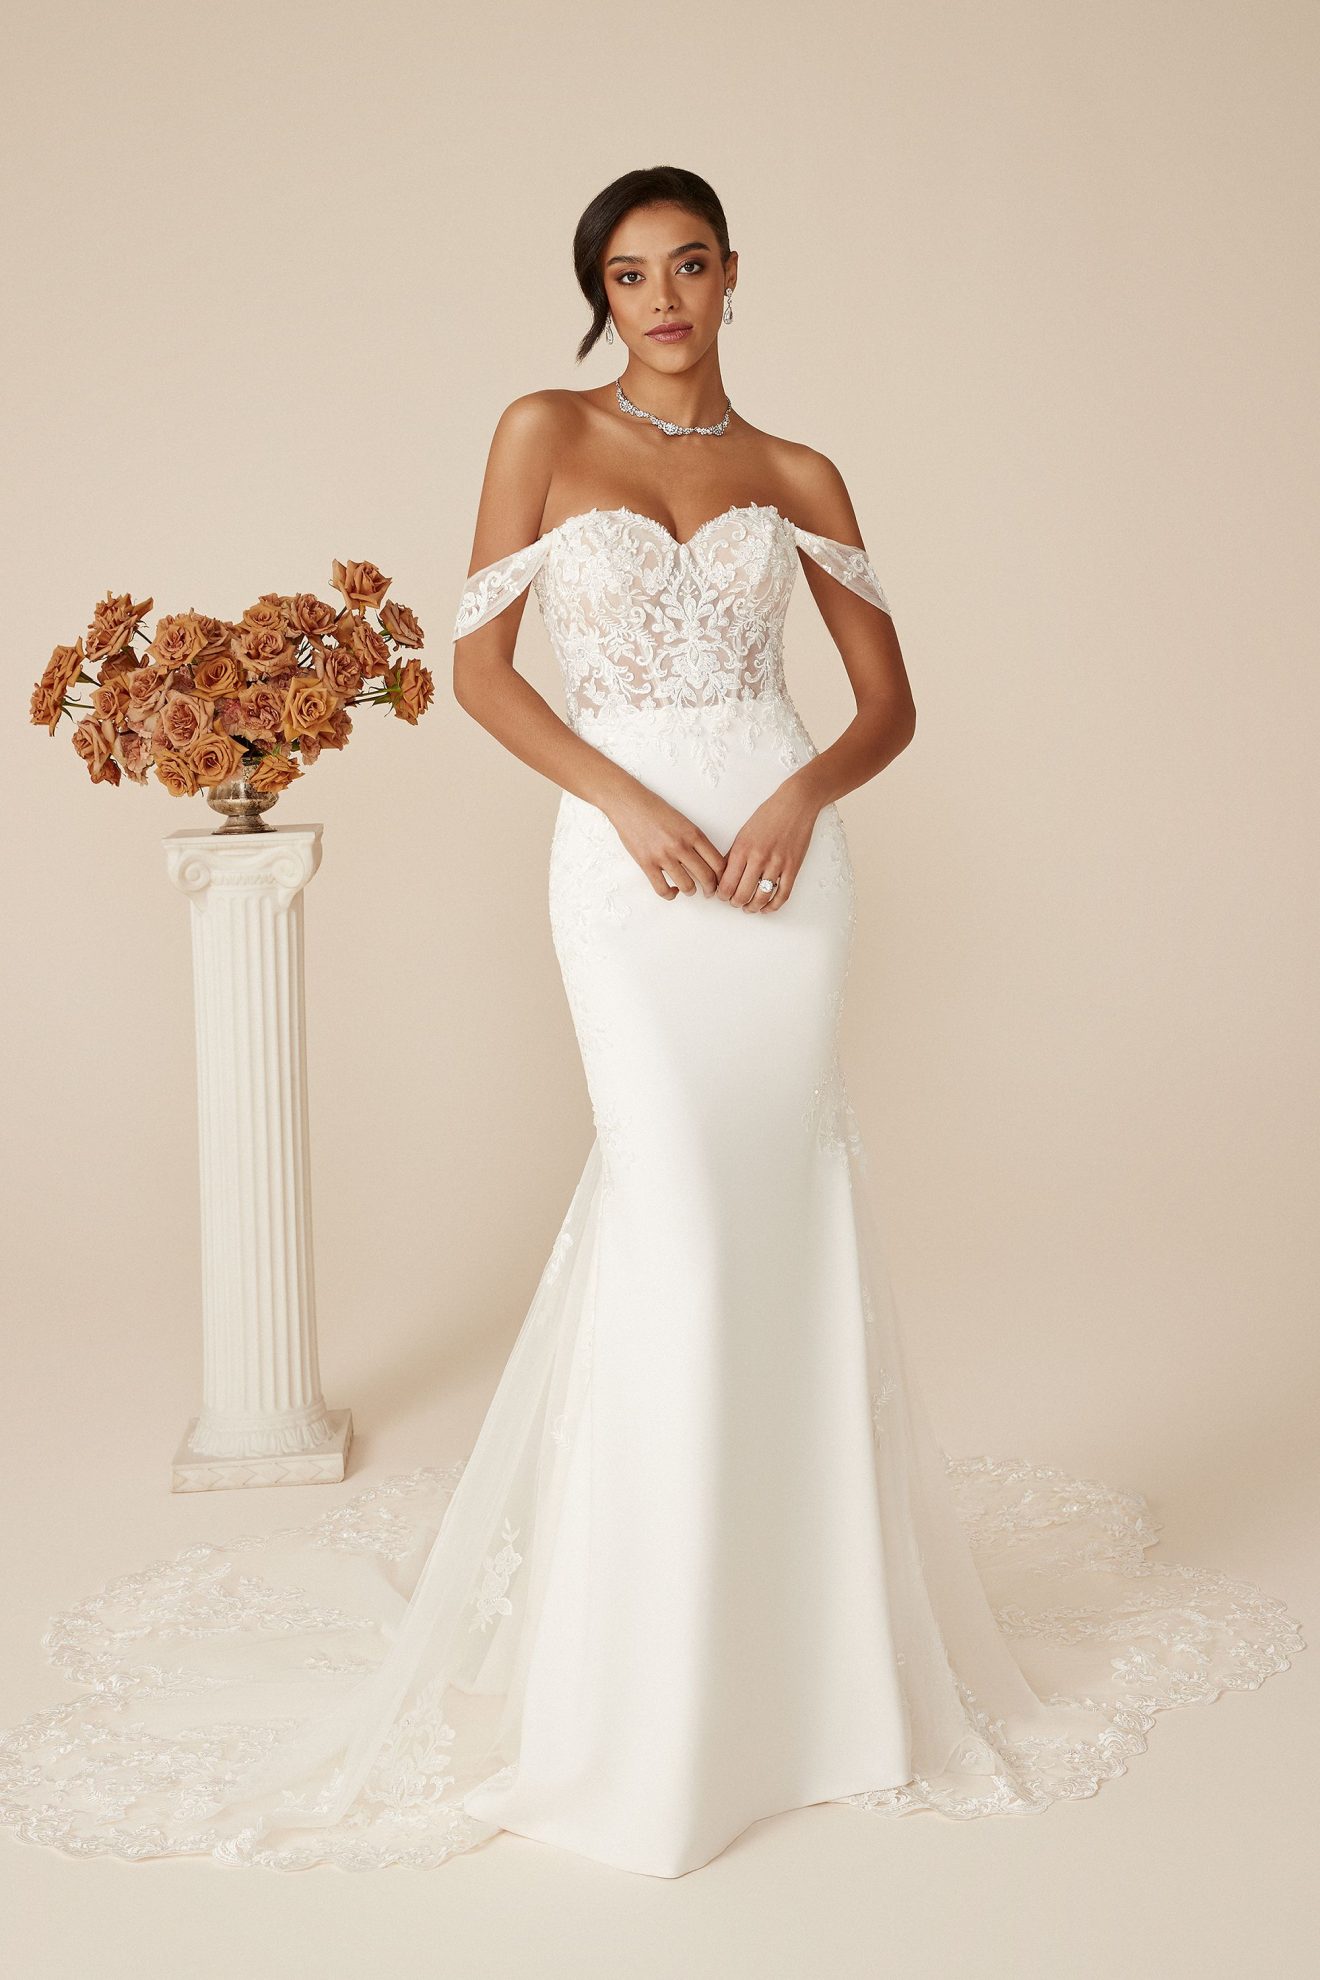 This image shows the Daria wedding dress by Justin Alexander and relates to wedding dress trends such as off-the-shoulder necklines